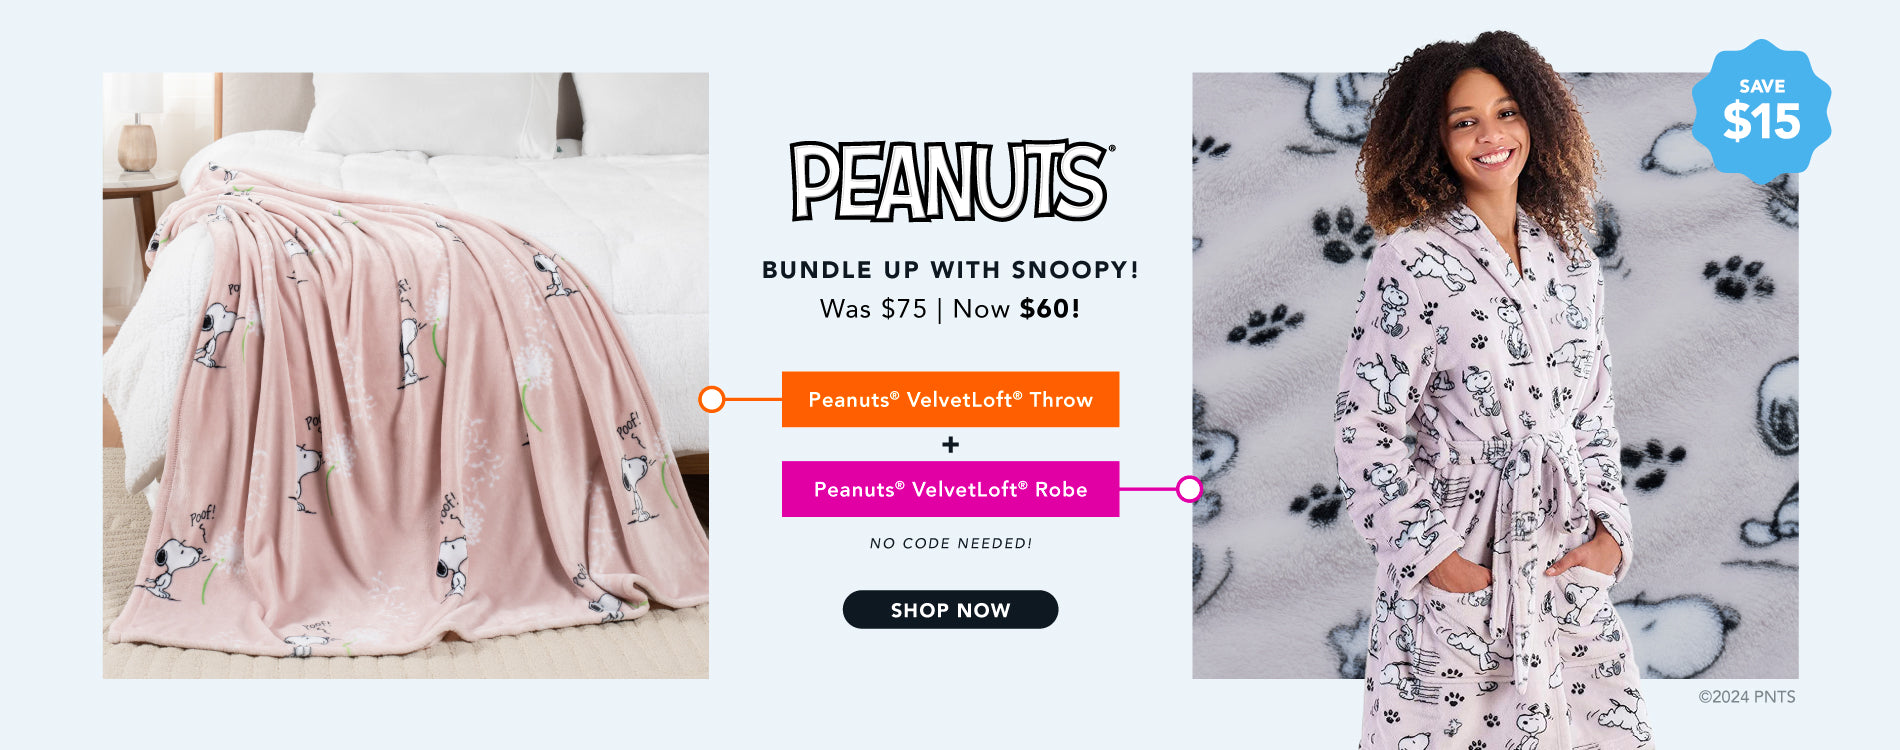 Bundle up with Snoopy with our Peanuts Bundle Deal for $60 instead of $75! Bundle our Peanuts VelvetLoft Throw with our Peanuts VelvetLoft Robe for a $15 savings. No code needed. 